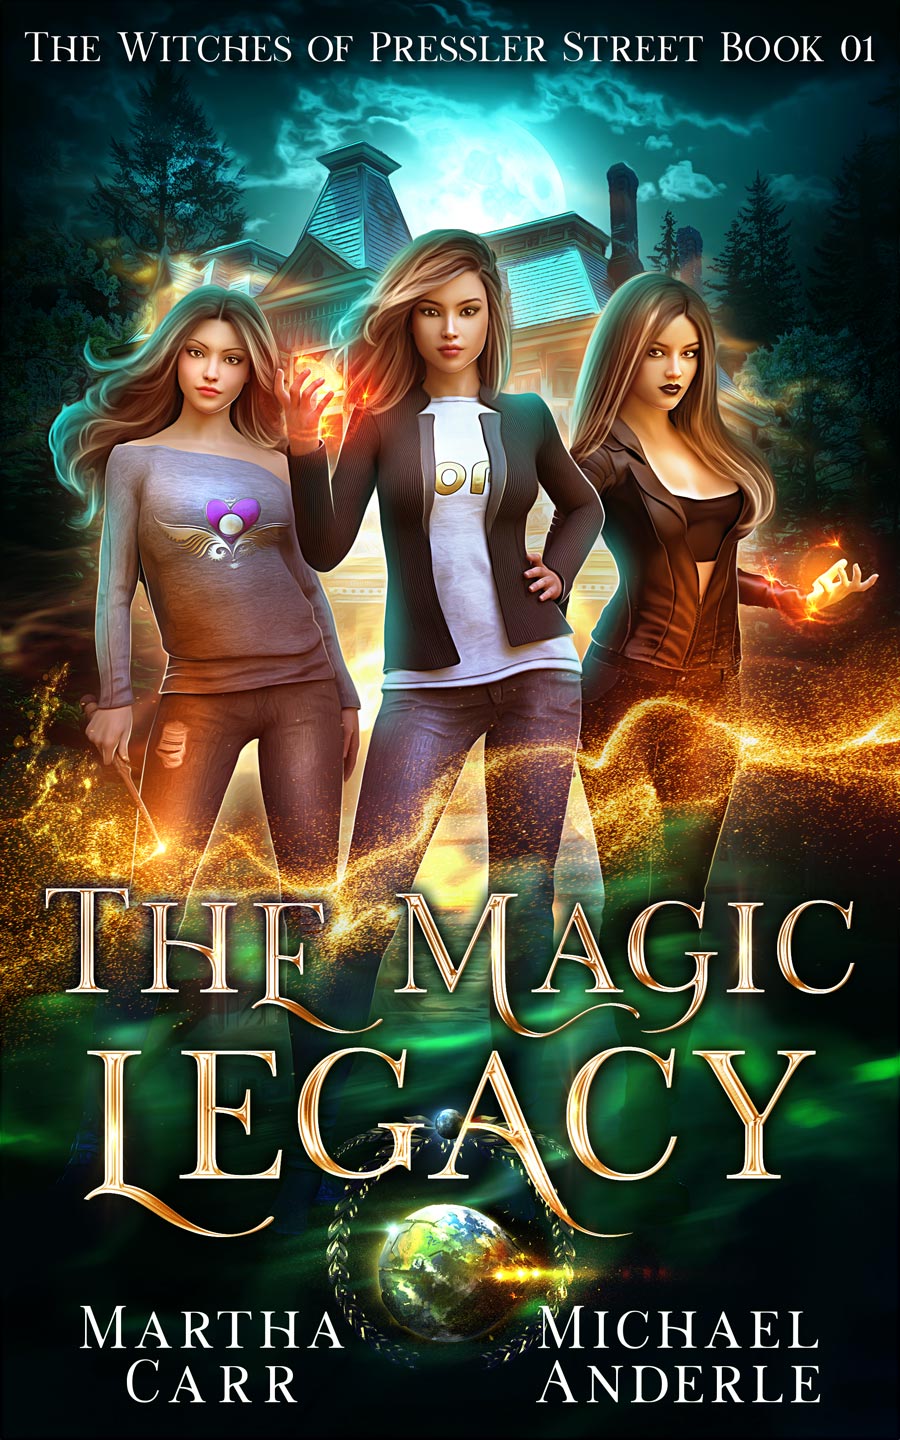 The Witches of Pressler Street Book 1: The Magic Legacy